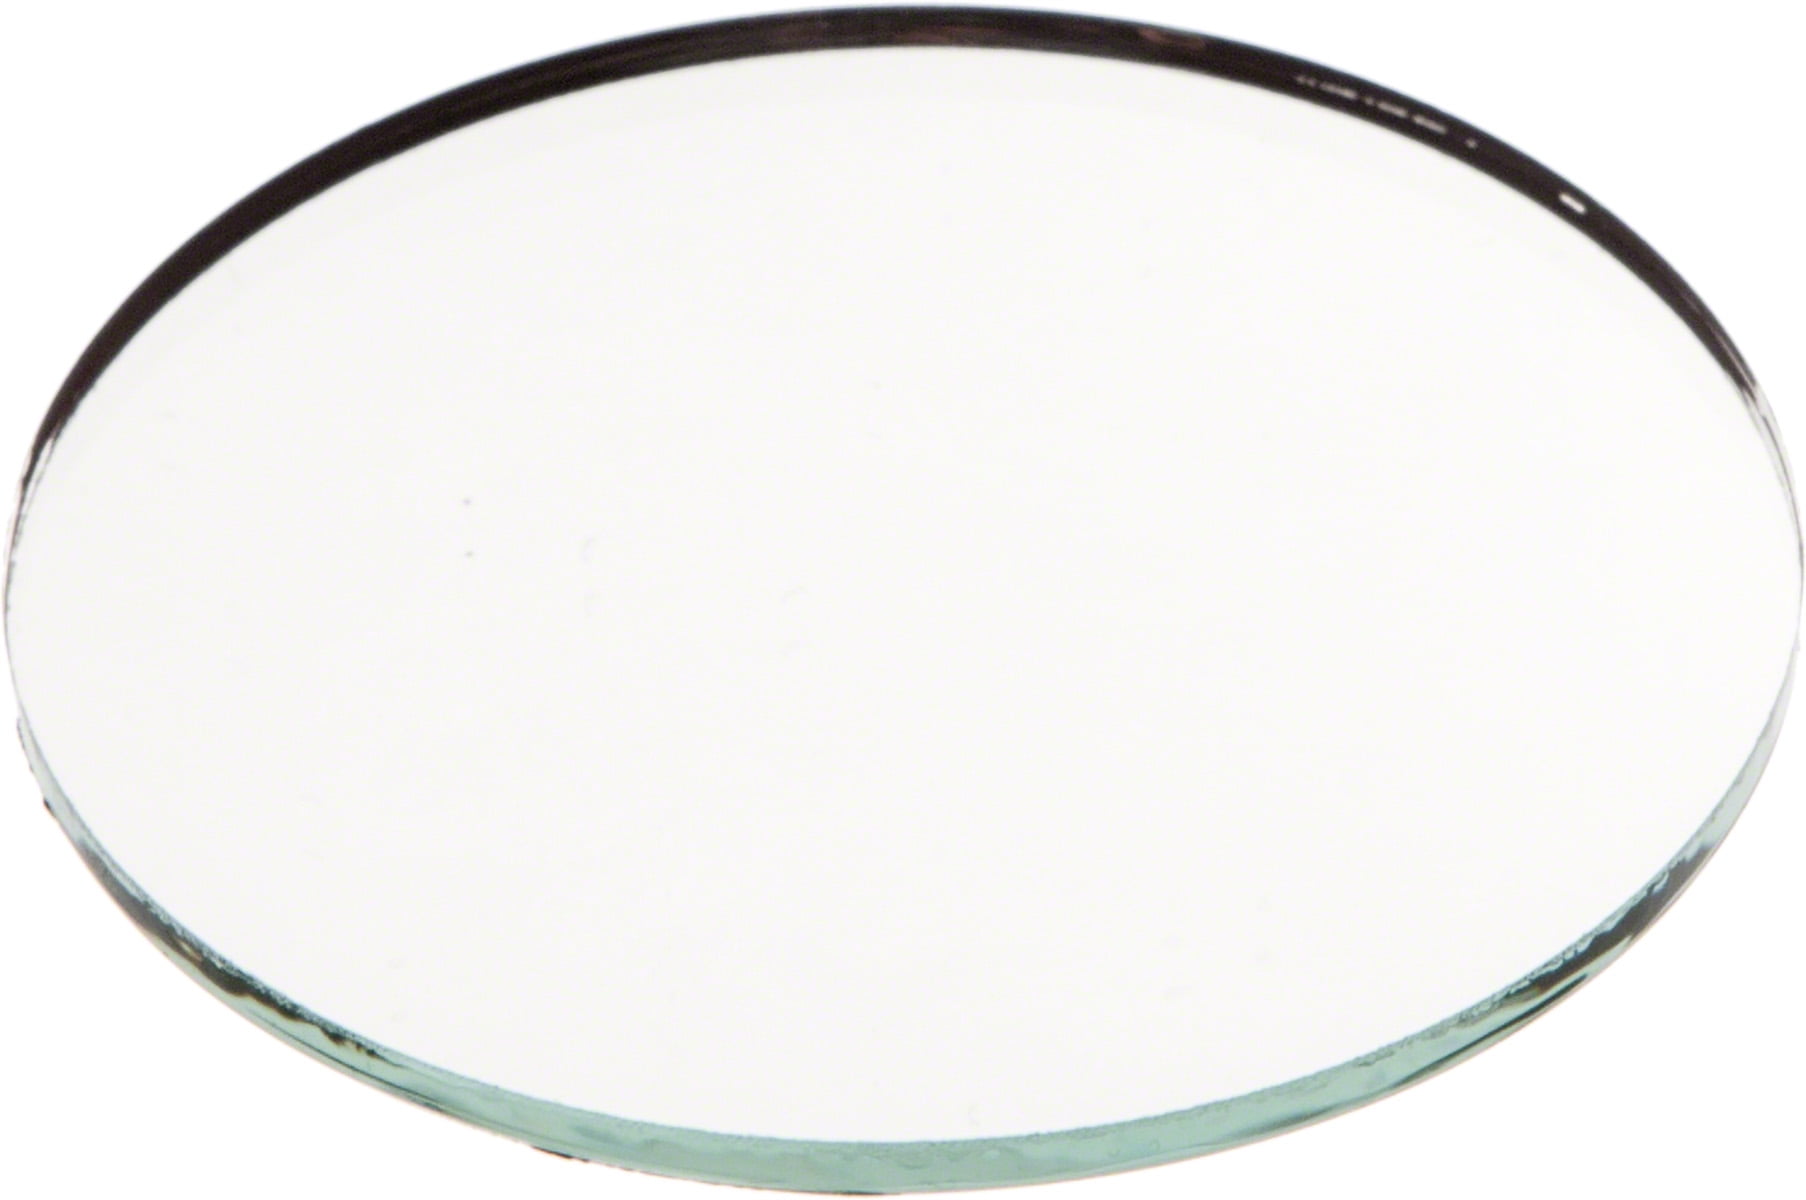 Plymor Round 3mm Non-Beveled Glass Mirror Pack of 24 3 inch x 3 inch 